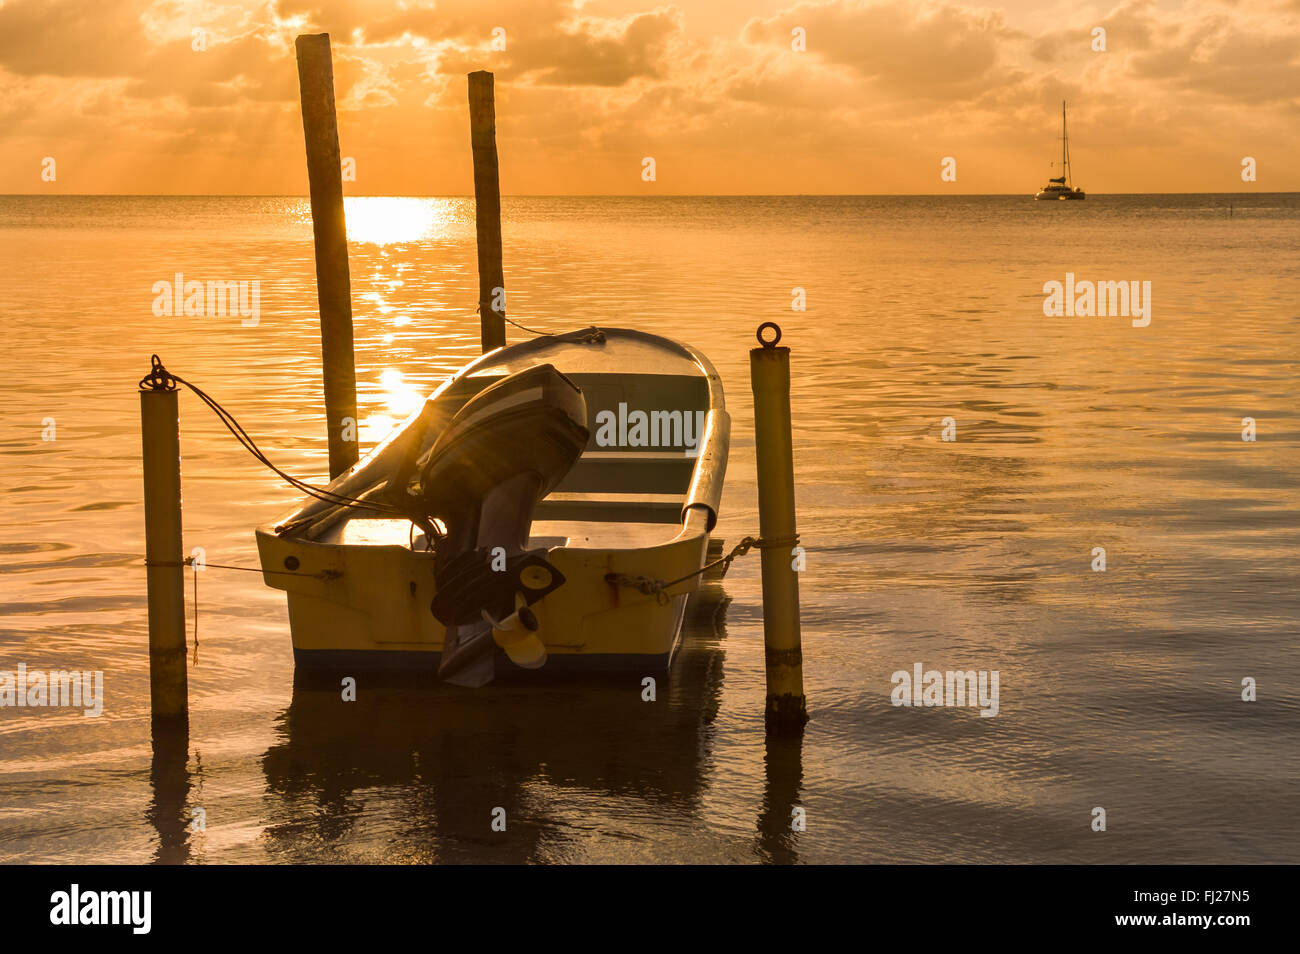 Sunset in the Caribbean sea by Caye Caulker island, Belize Stock Photo